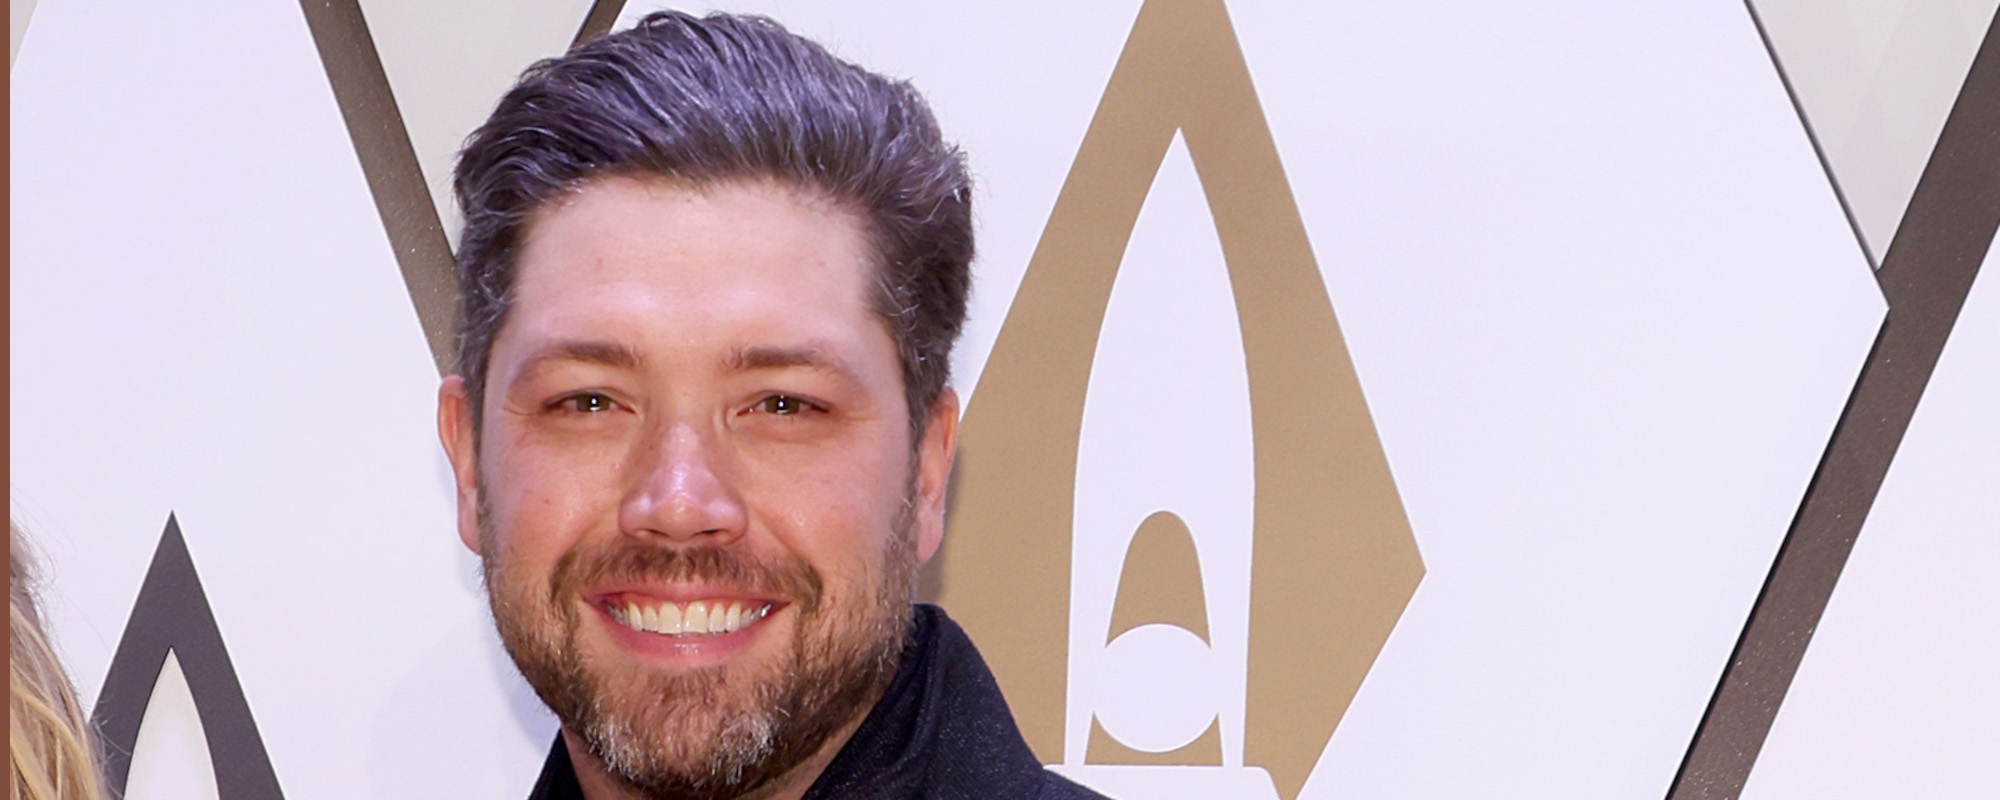 “Famous Friends” Wins ASCAP Country Song of the Year, Corey Crowder Talks Making Hits